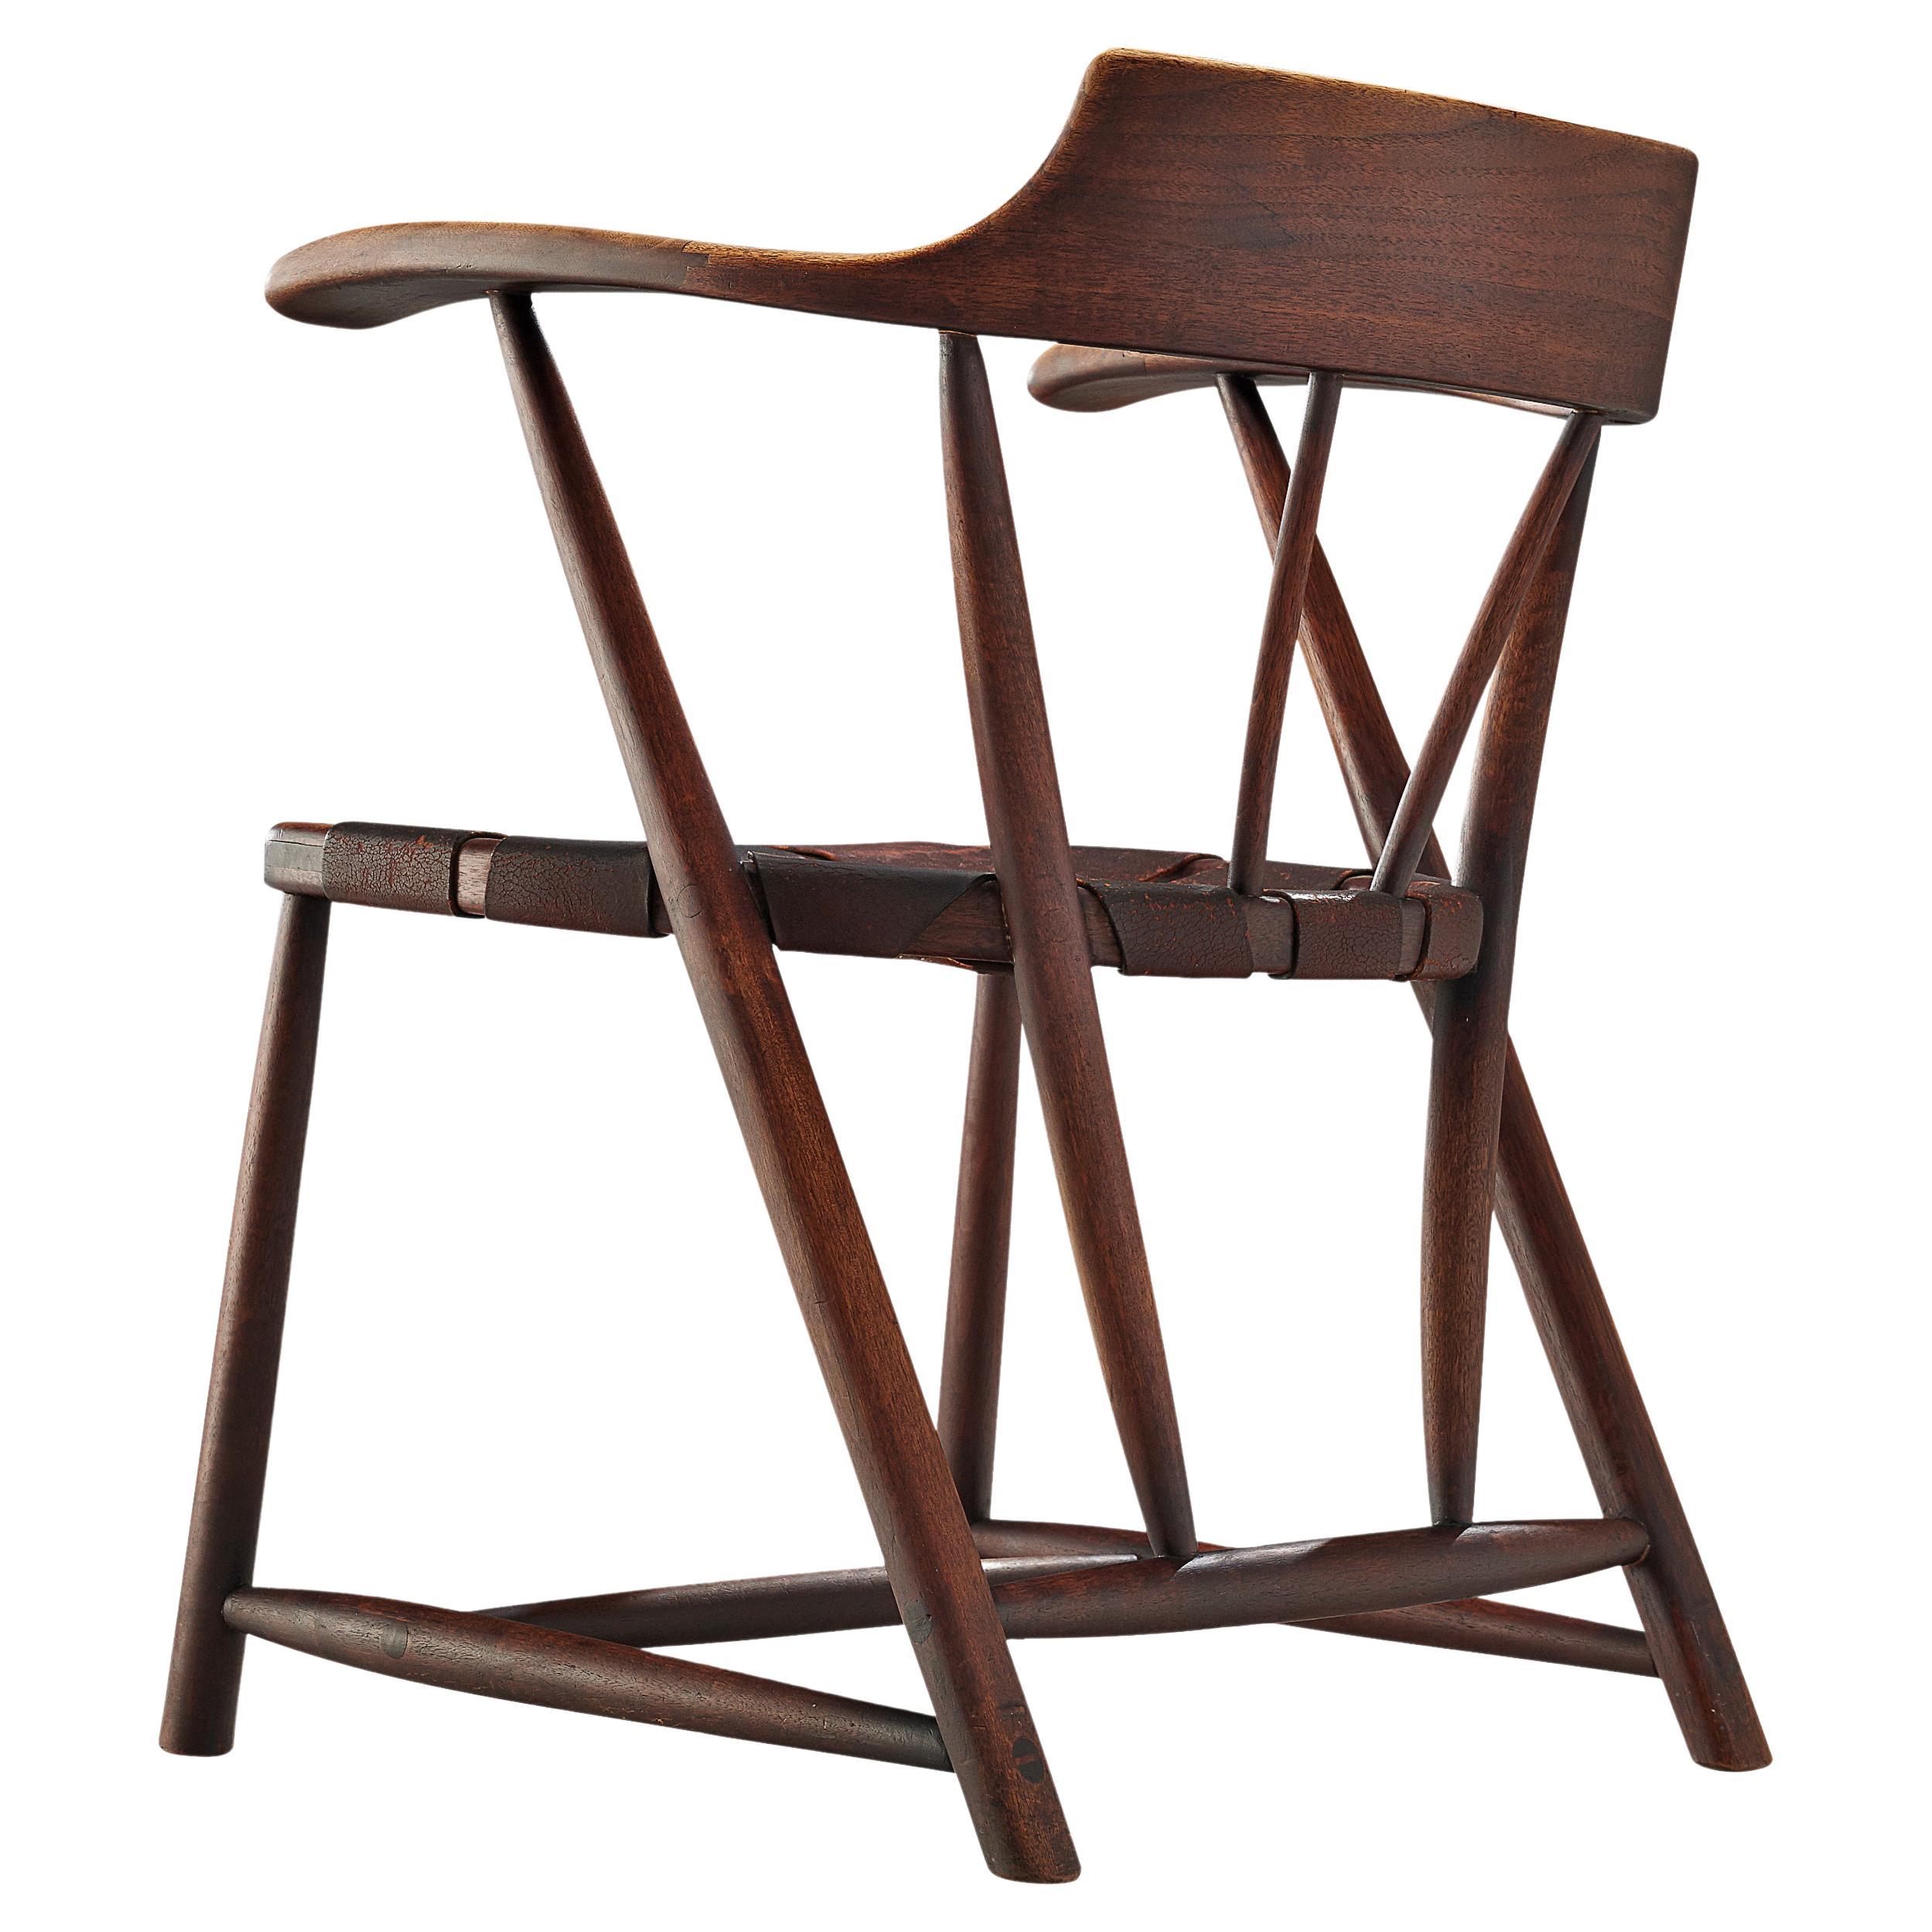 Early Wharton Esherick Captain’s Chair in American Walnut and Brown Leather